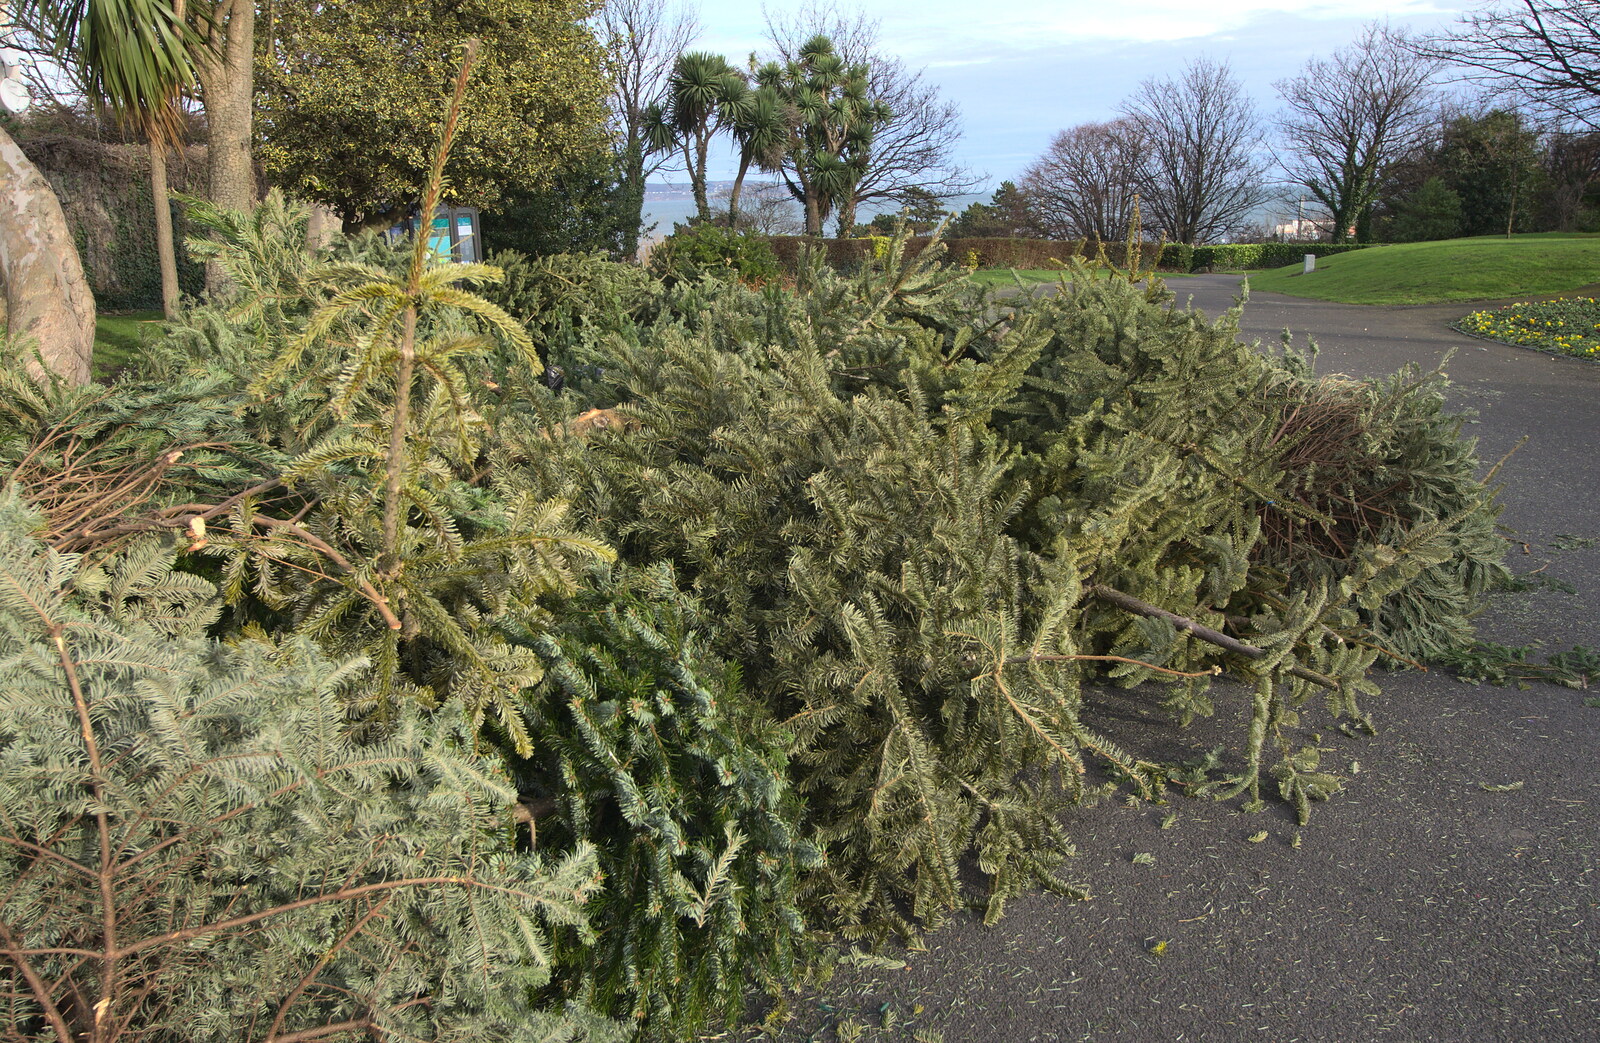 A pile of Christmas trees for recycling from A Morning in Blackrock, County Dublin, Ireland - 8th January 2012